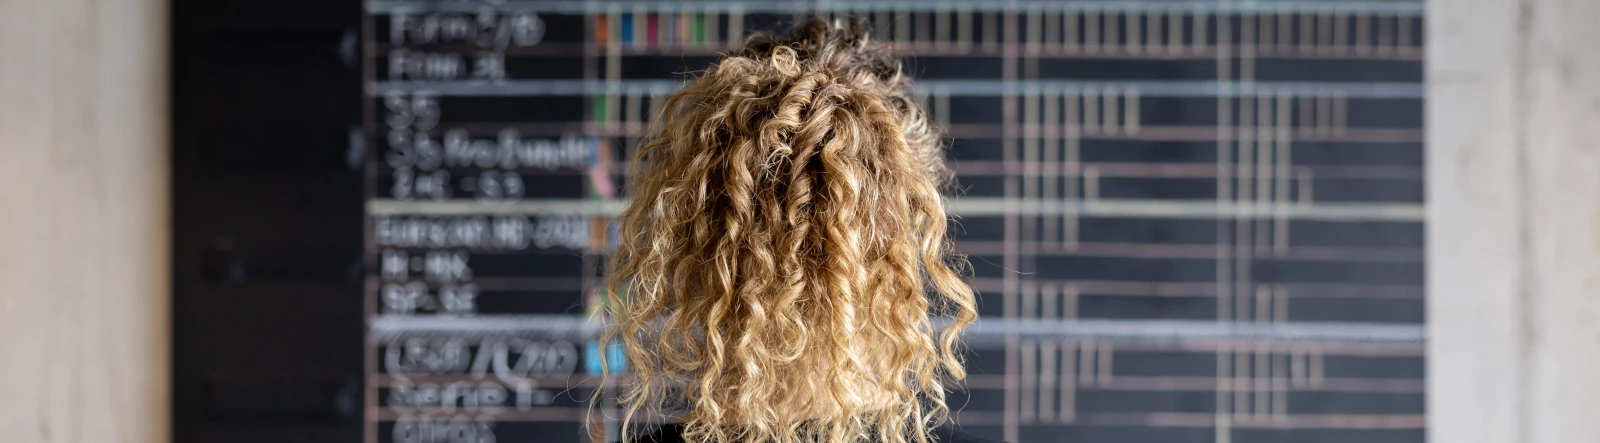 A woman with curly blonde hair looking at a calendar on a blackboard